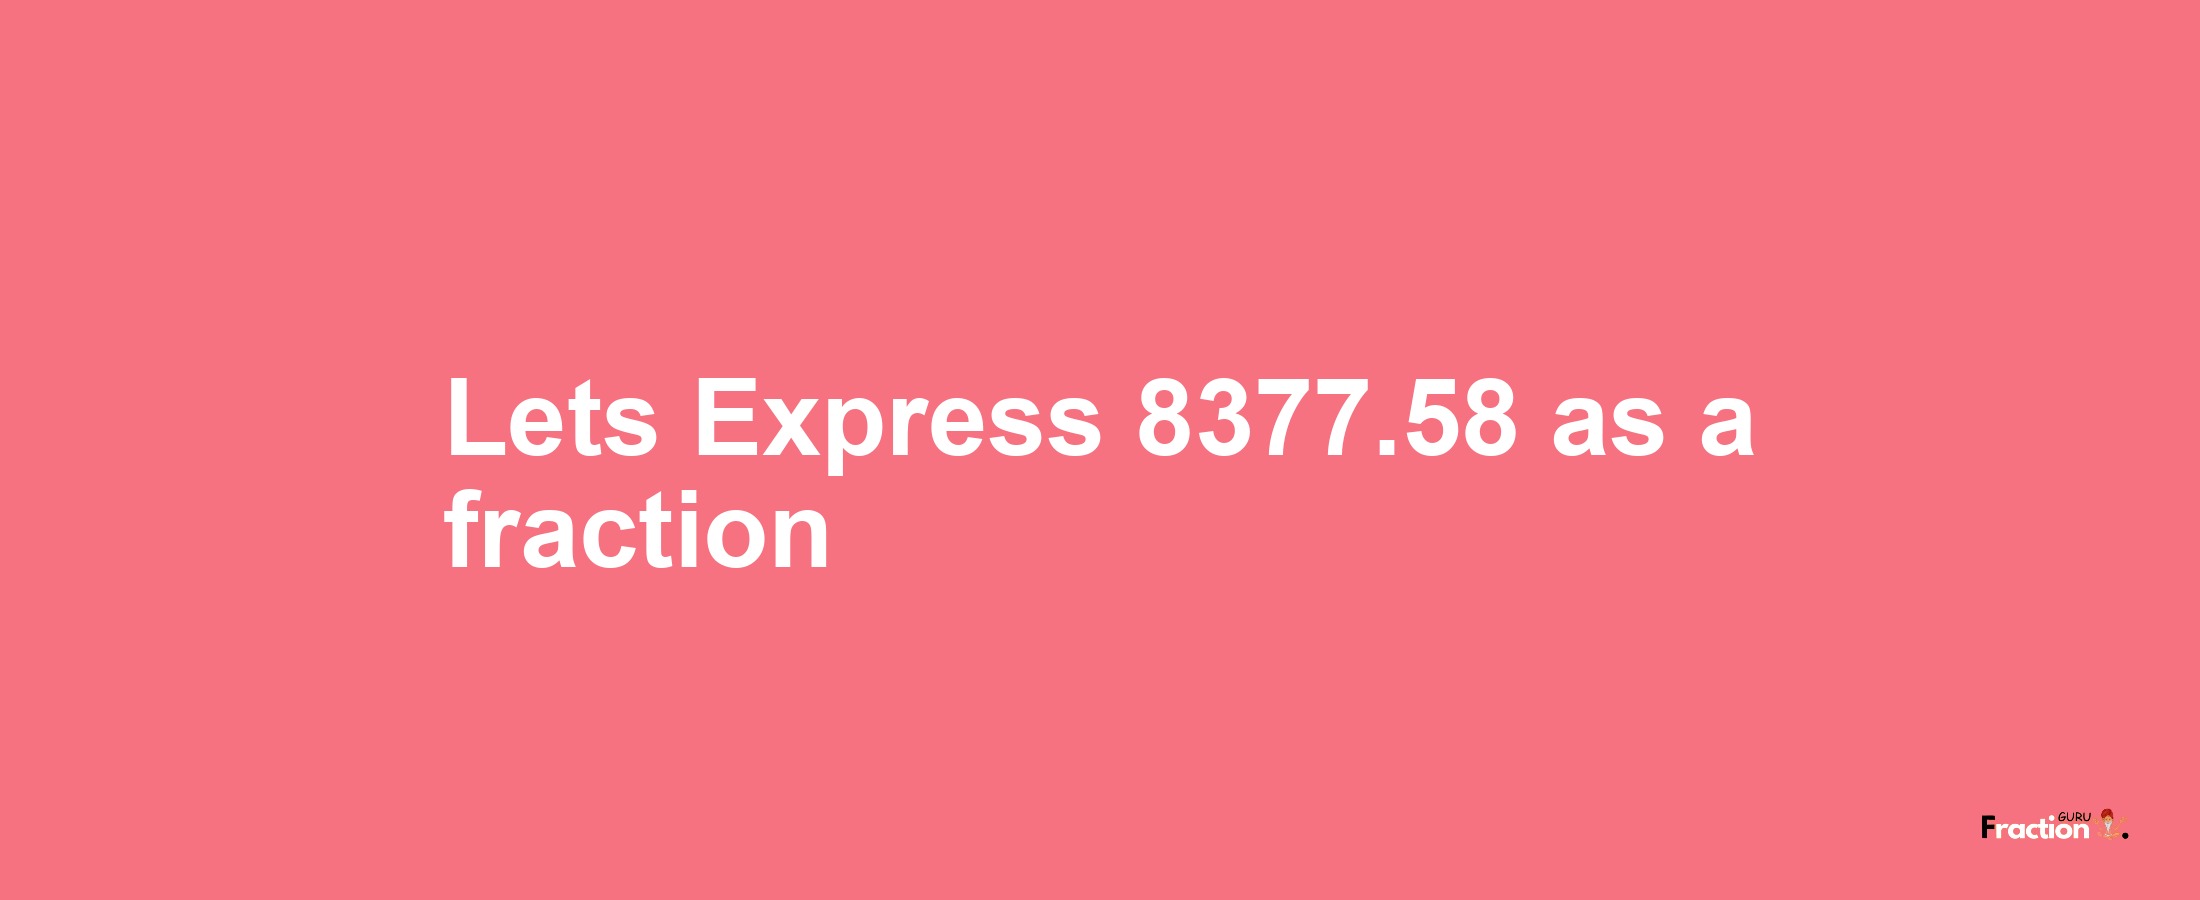 Lets Express 8377.58 as afraction